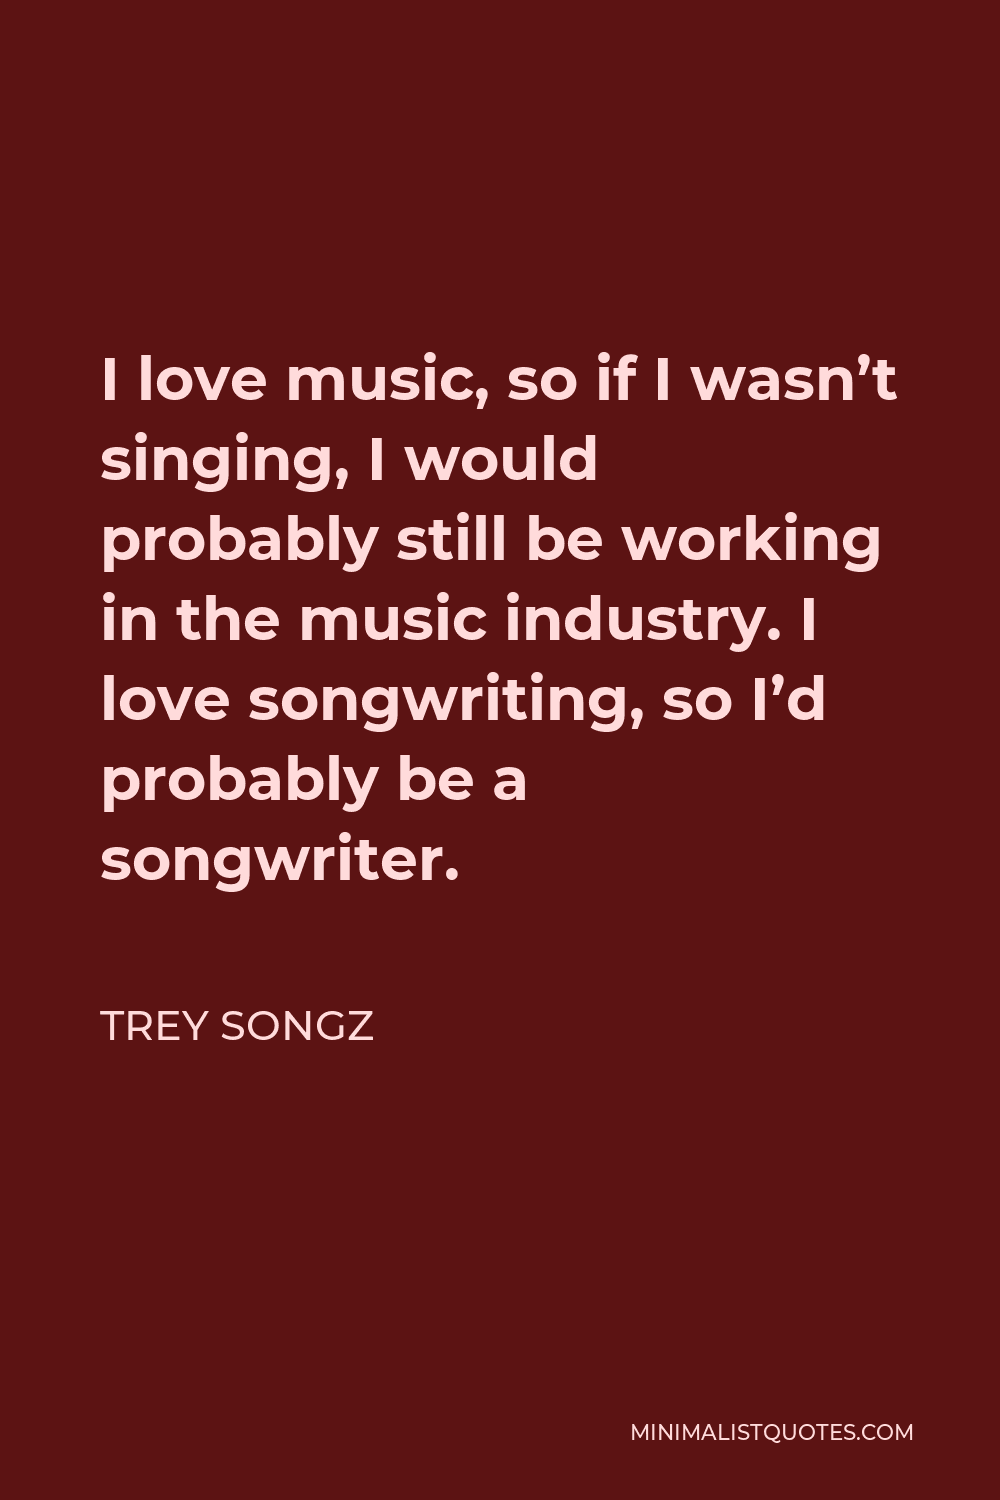 Trey Songz Quote - I love music, so if I wasn’t singing, I would probably still be working in the music industry. I love songwriting, so I’d probably be a songwriter.